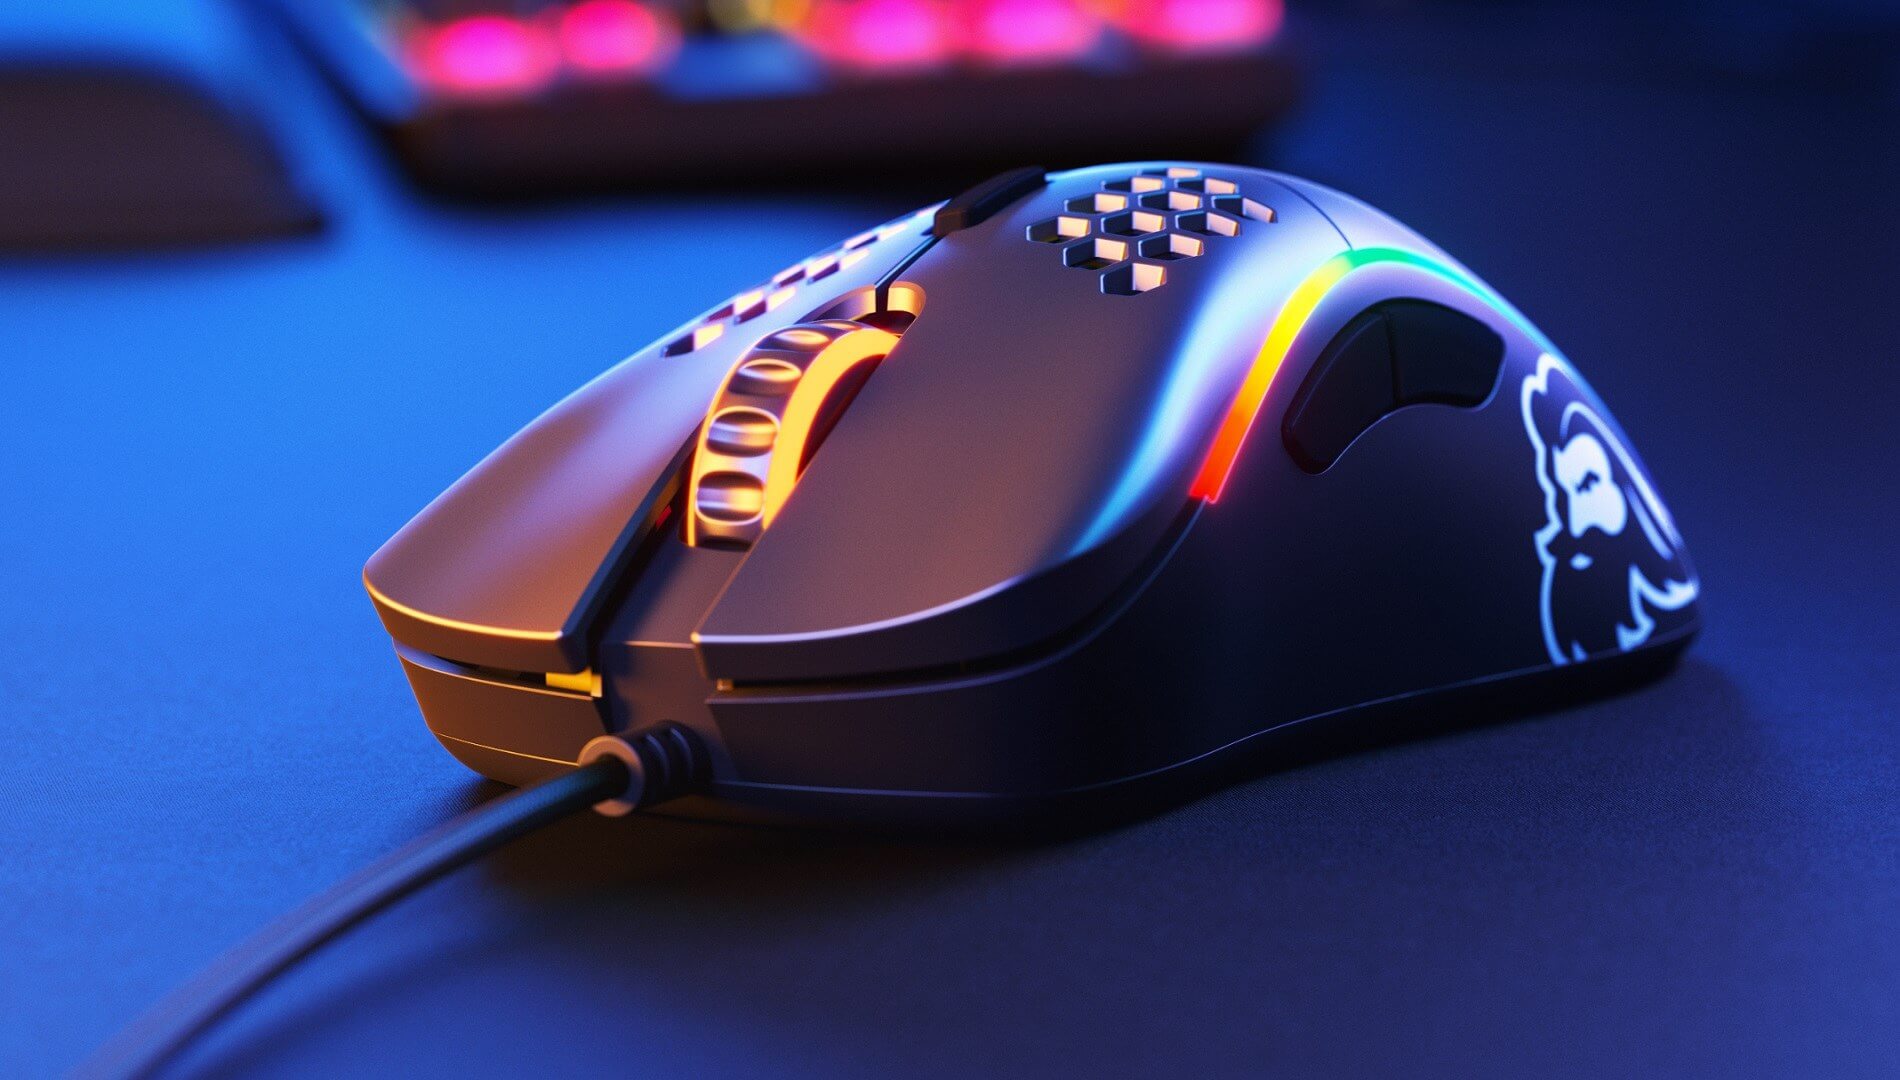 Glorious PC Gaming Race's Model D mouse is now available